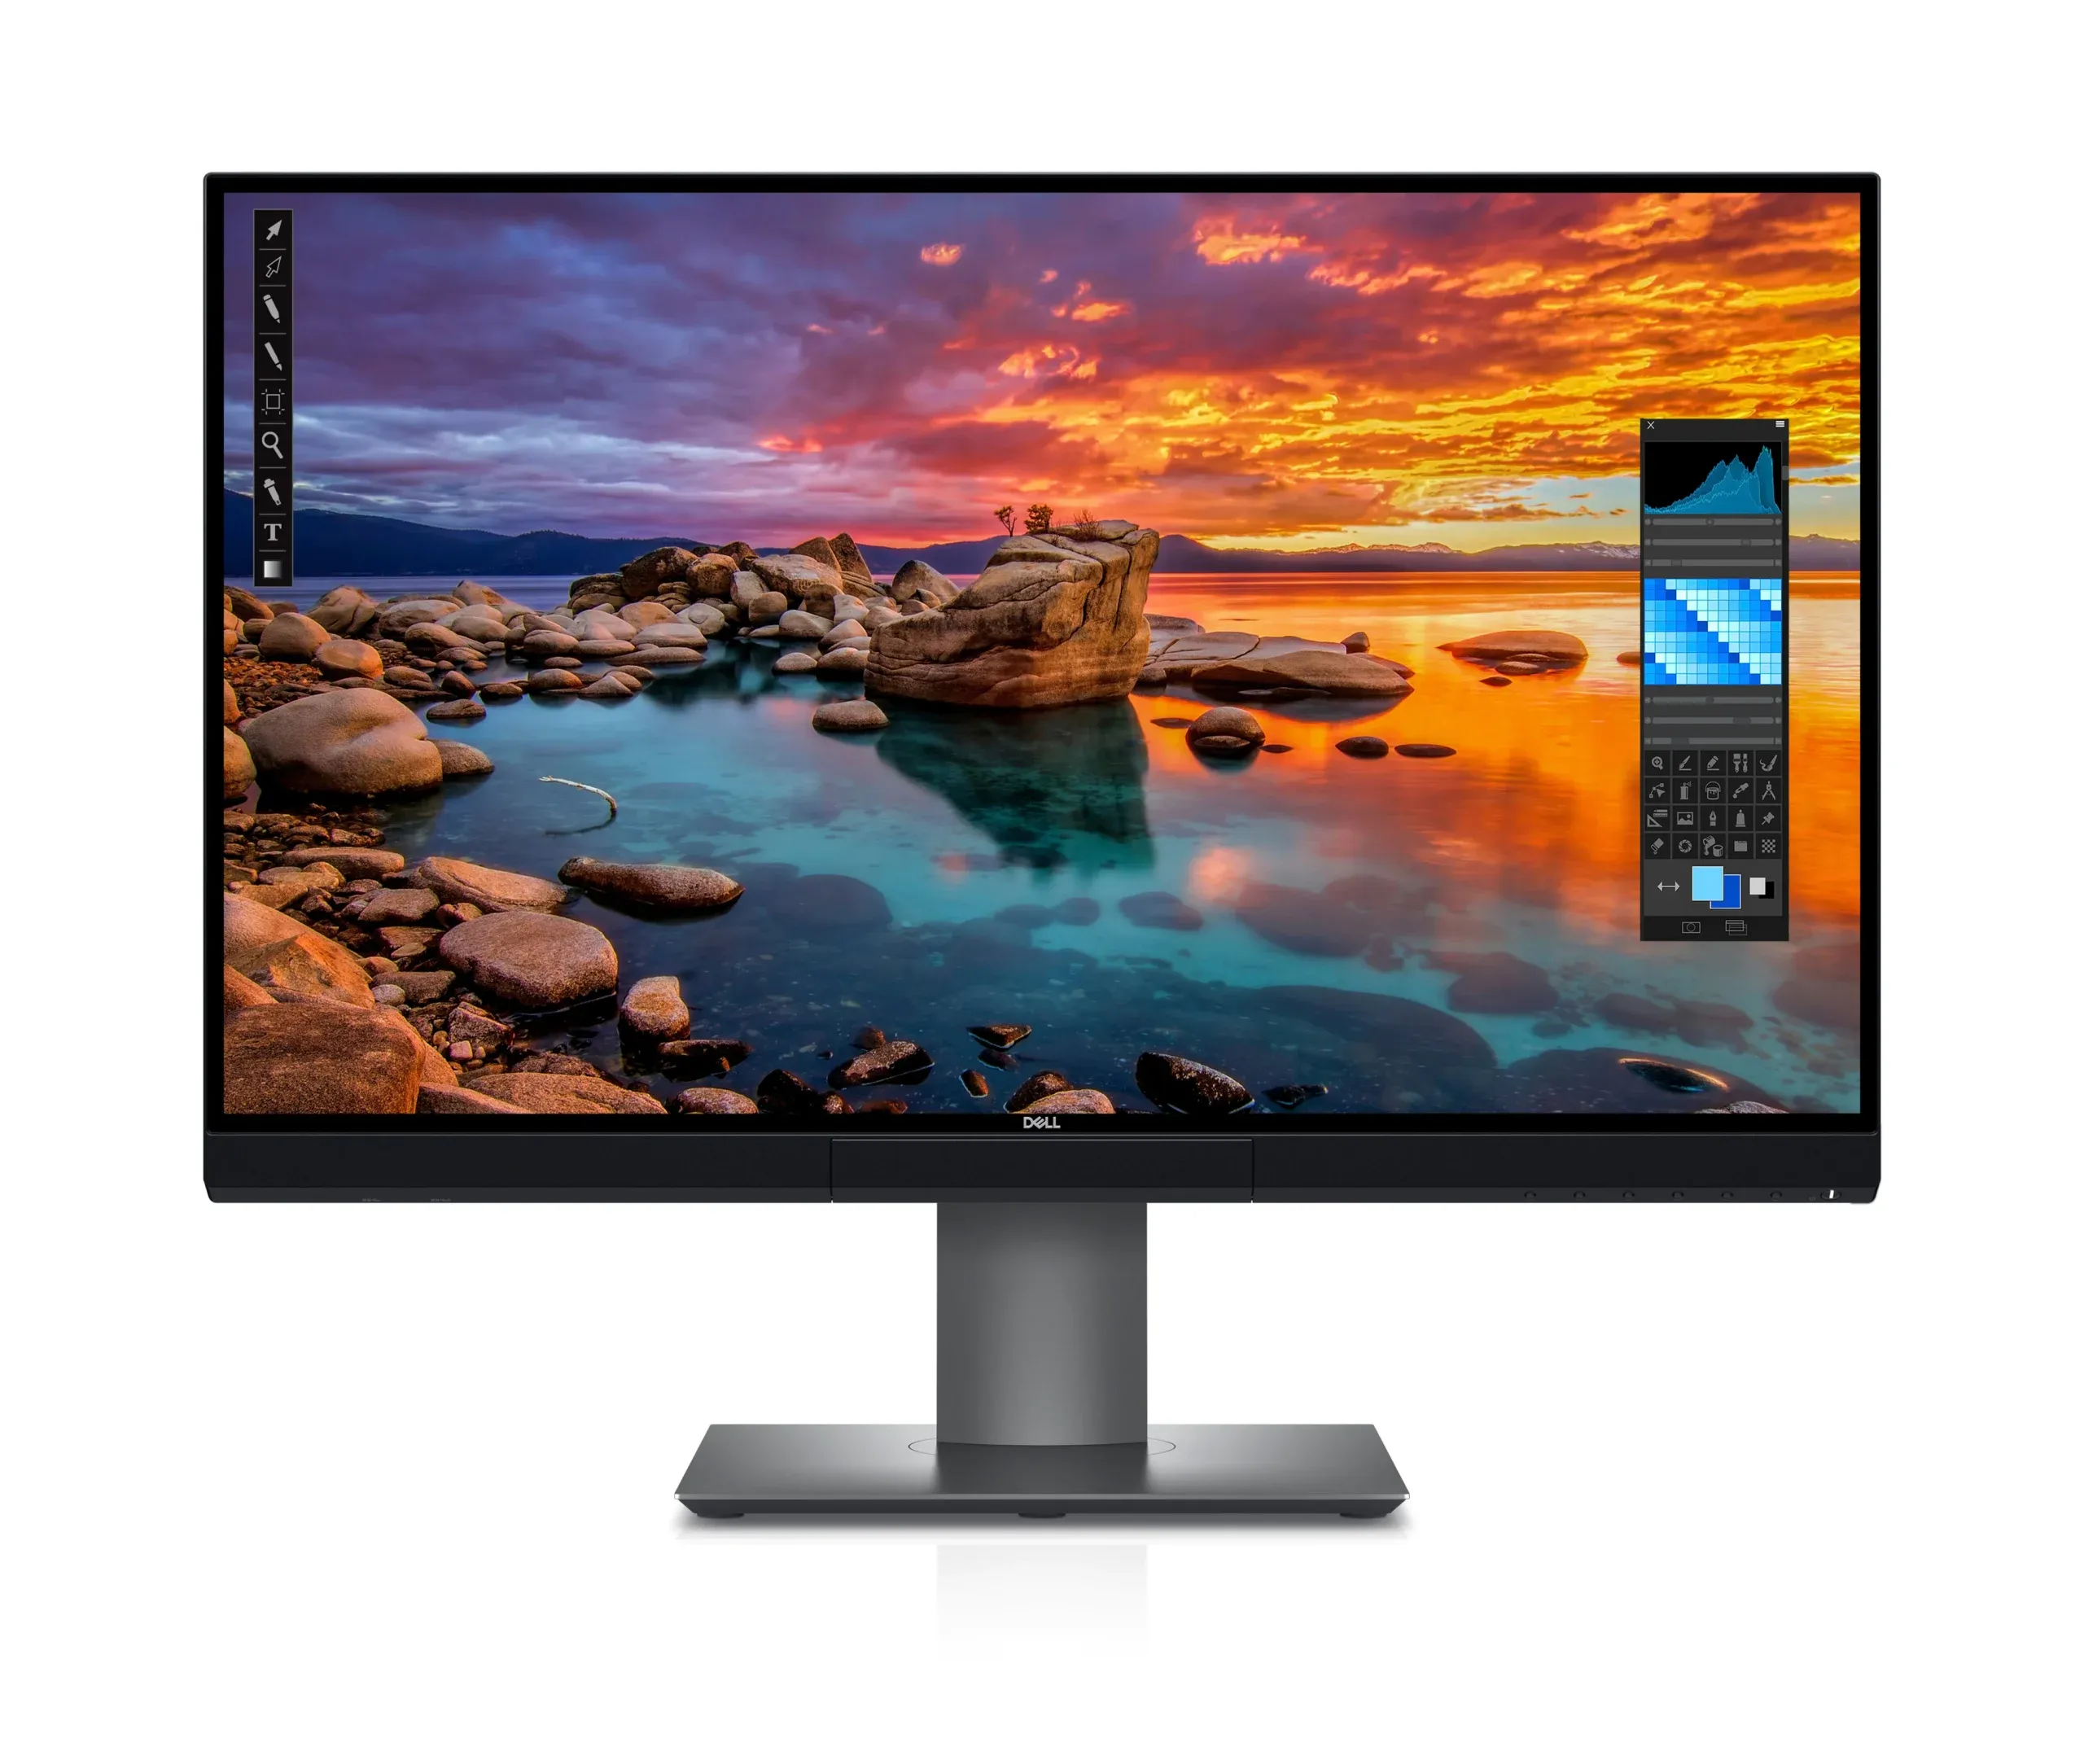 Take advantage of the Thunderbolt support with this fantastic display from Dell, featuring 4K resolution, color calibration, and 100% Adobe RGB. Not only can you connect this monitor via Thunderbolt, but it also supports daisy-chaining so you can add another Thunderbolt monitor. It is a bit pricey, however.